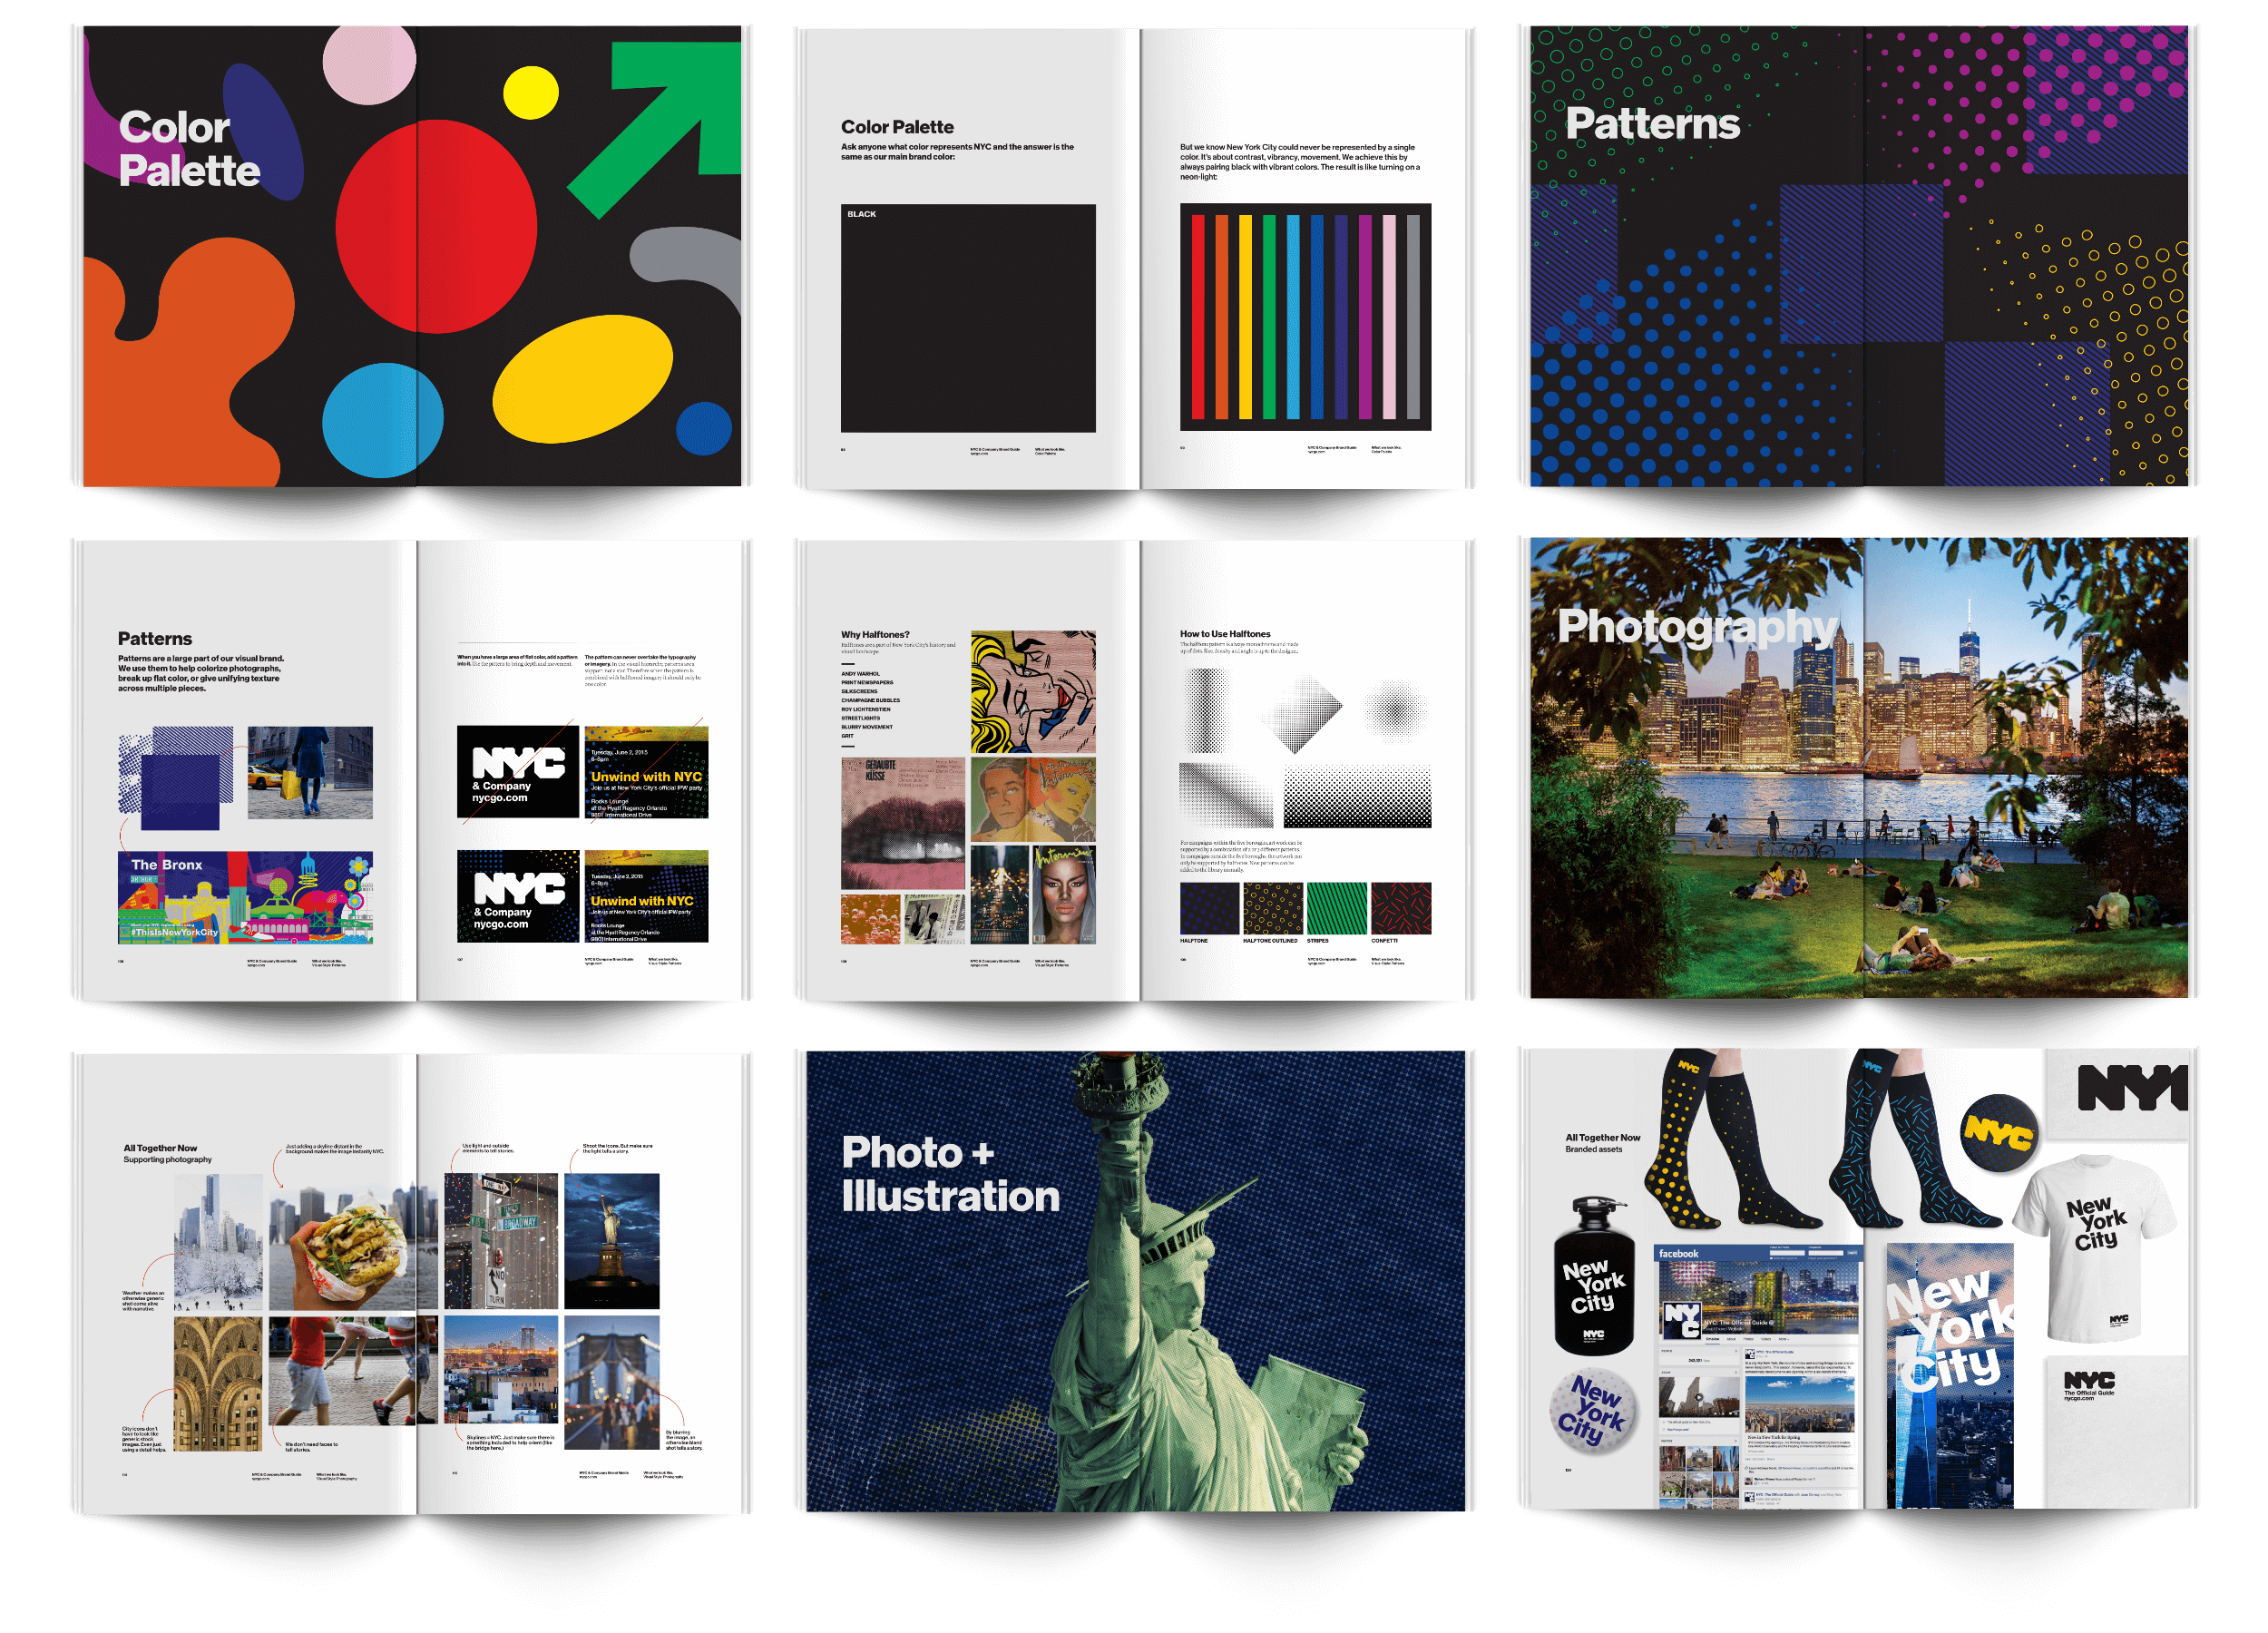 NYC rebrand brand guidelines